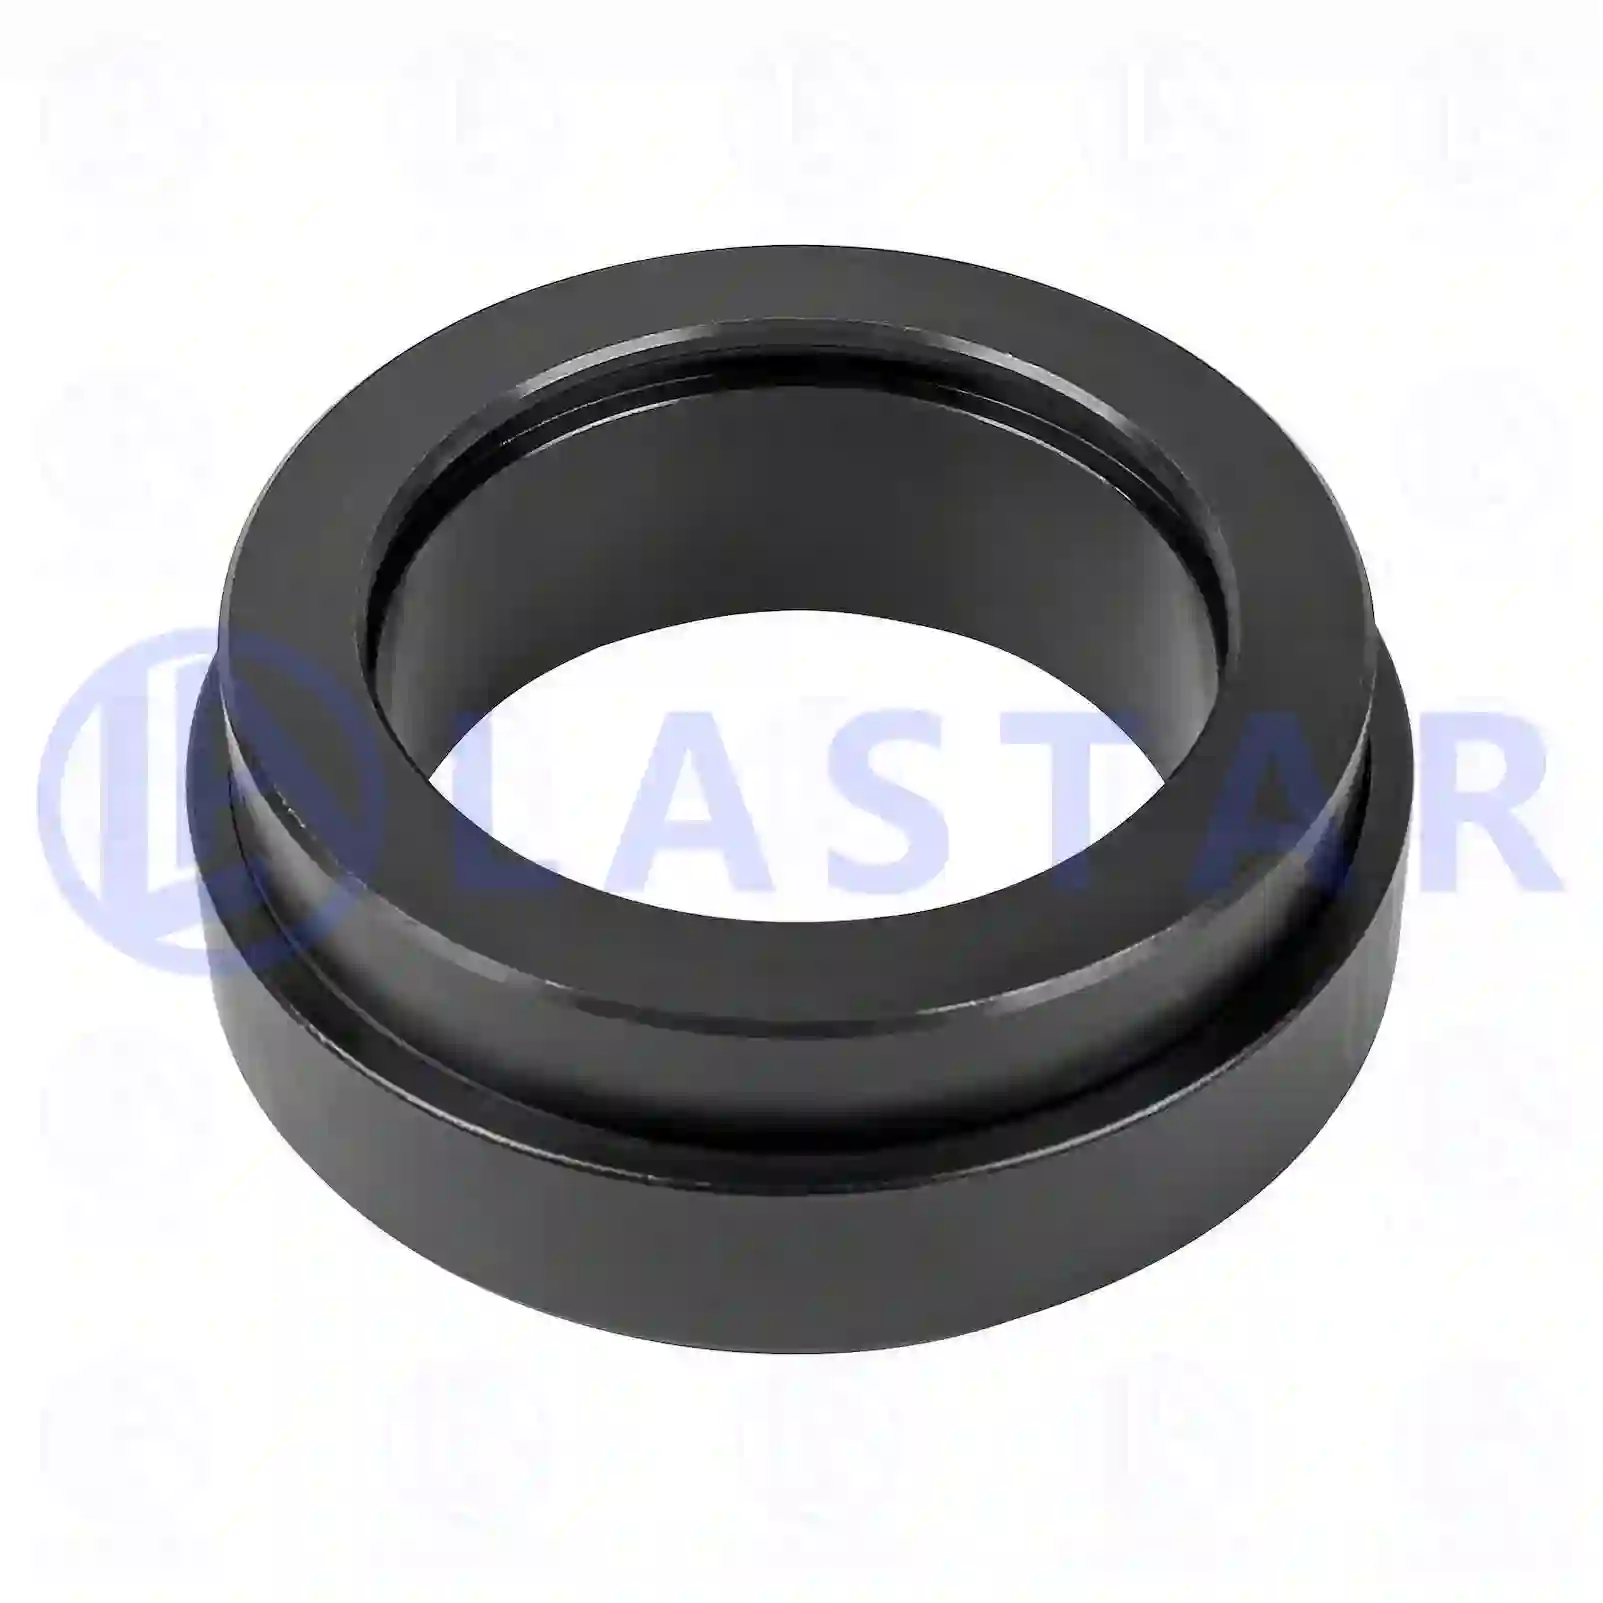 Joint bearing, 77729222, 08138307, 8138307, ||  77729222 Lastar Spare Part | Truck Spare Parts, Auotomotive Spare Parts Joint bearing, 77729222, 08138307, 8138307, ||  77729222 Lastar Spare Part | Truck Spare Parts, Auotomotive Spare Parts